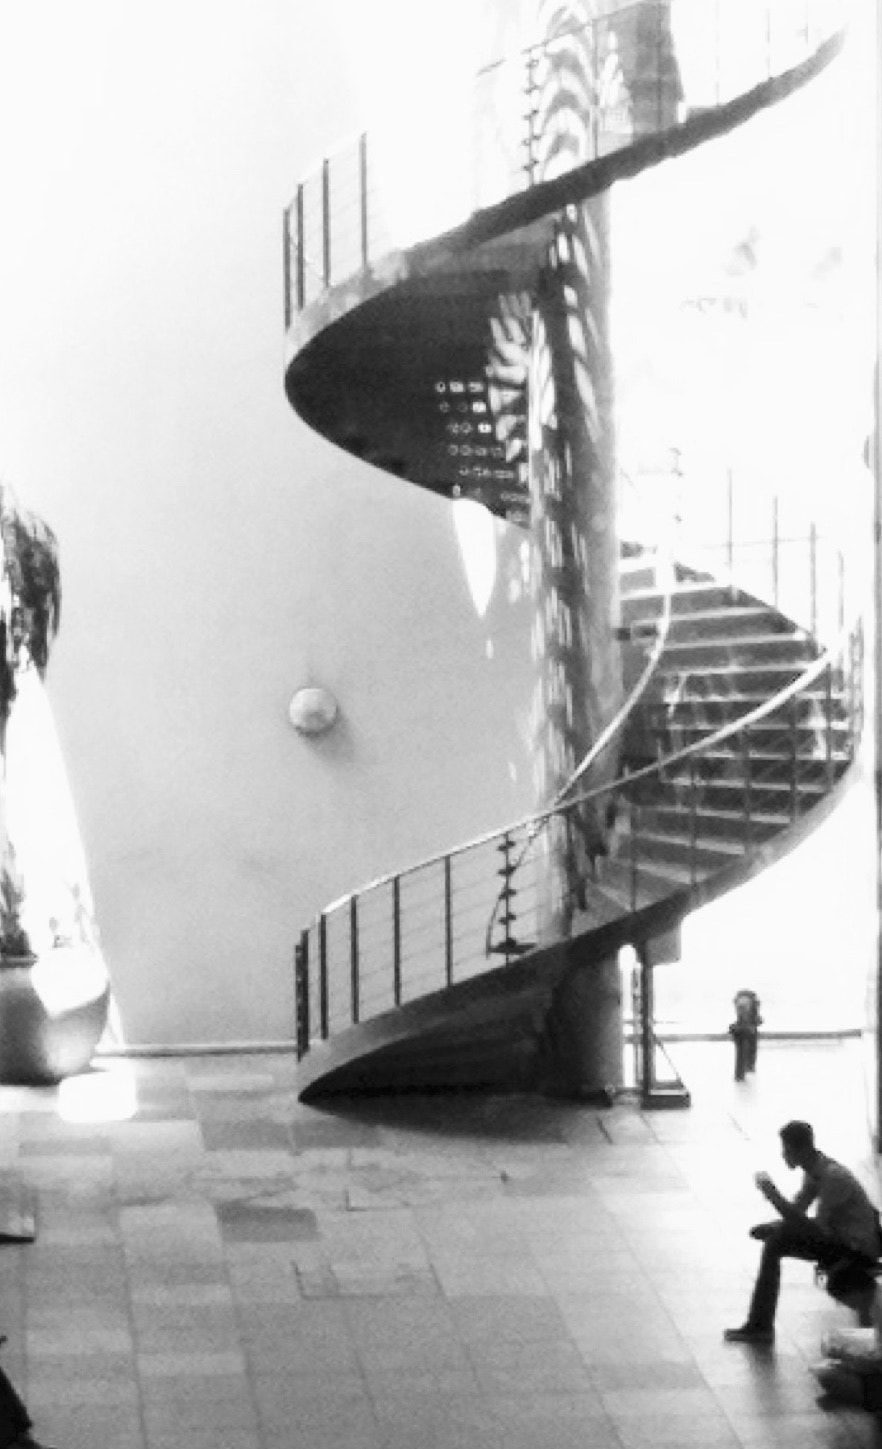 Apple iPhone 3GS sample photo. Spiral staircase, novena singapore photography